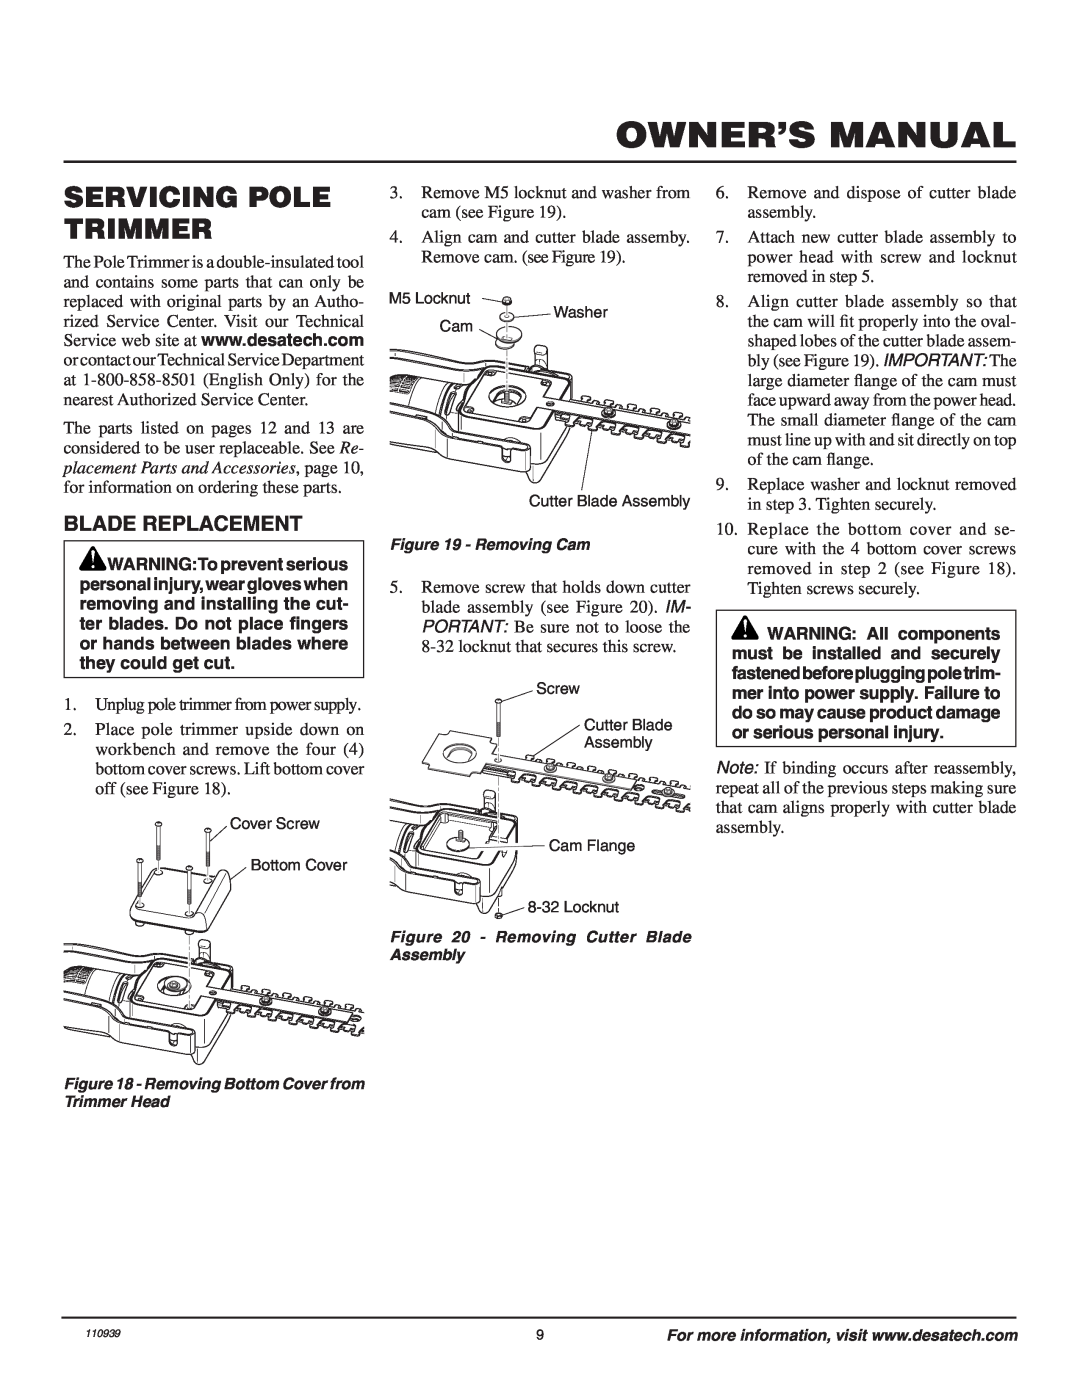 Remington Power Tools 117535-01A owner manual Servicing Pole Trimmer, Blade Replacement, Owner’S Manual 